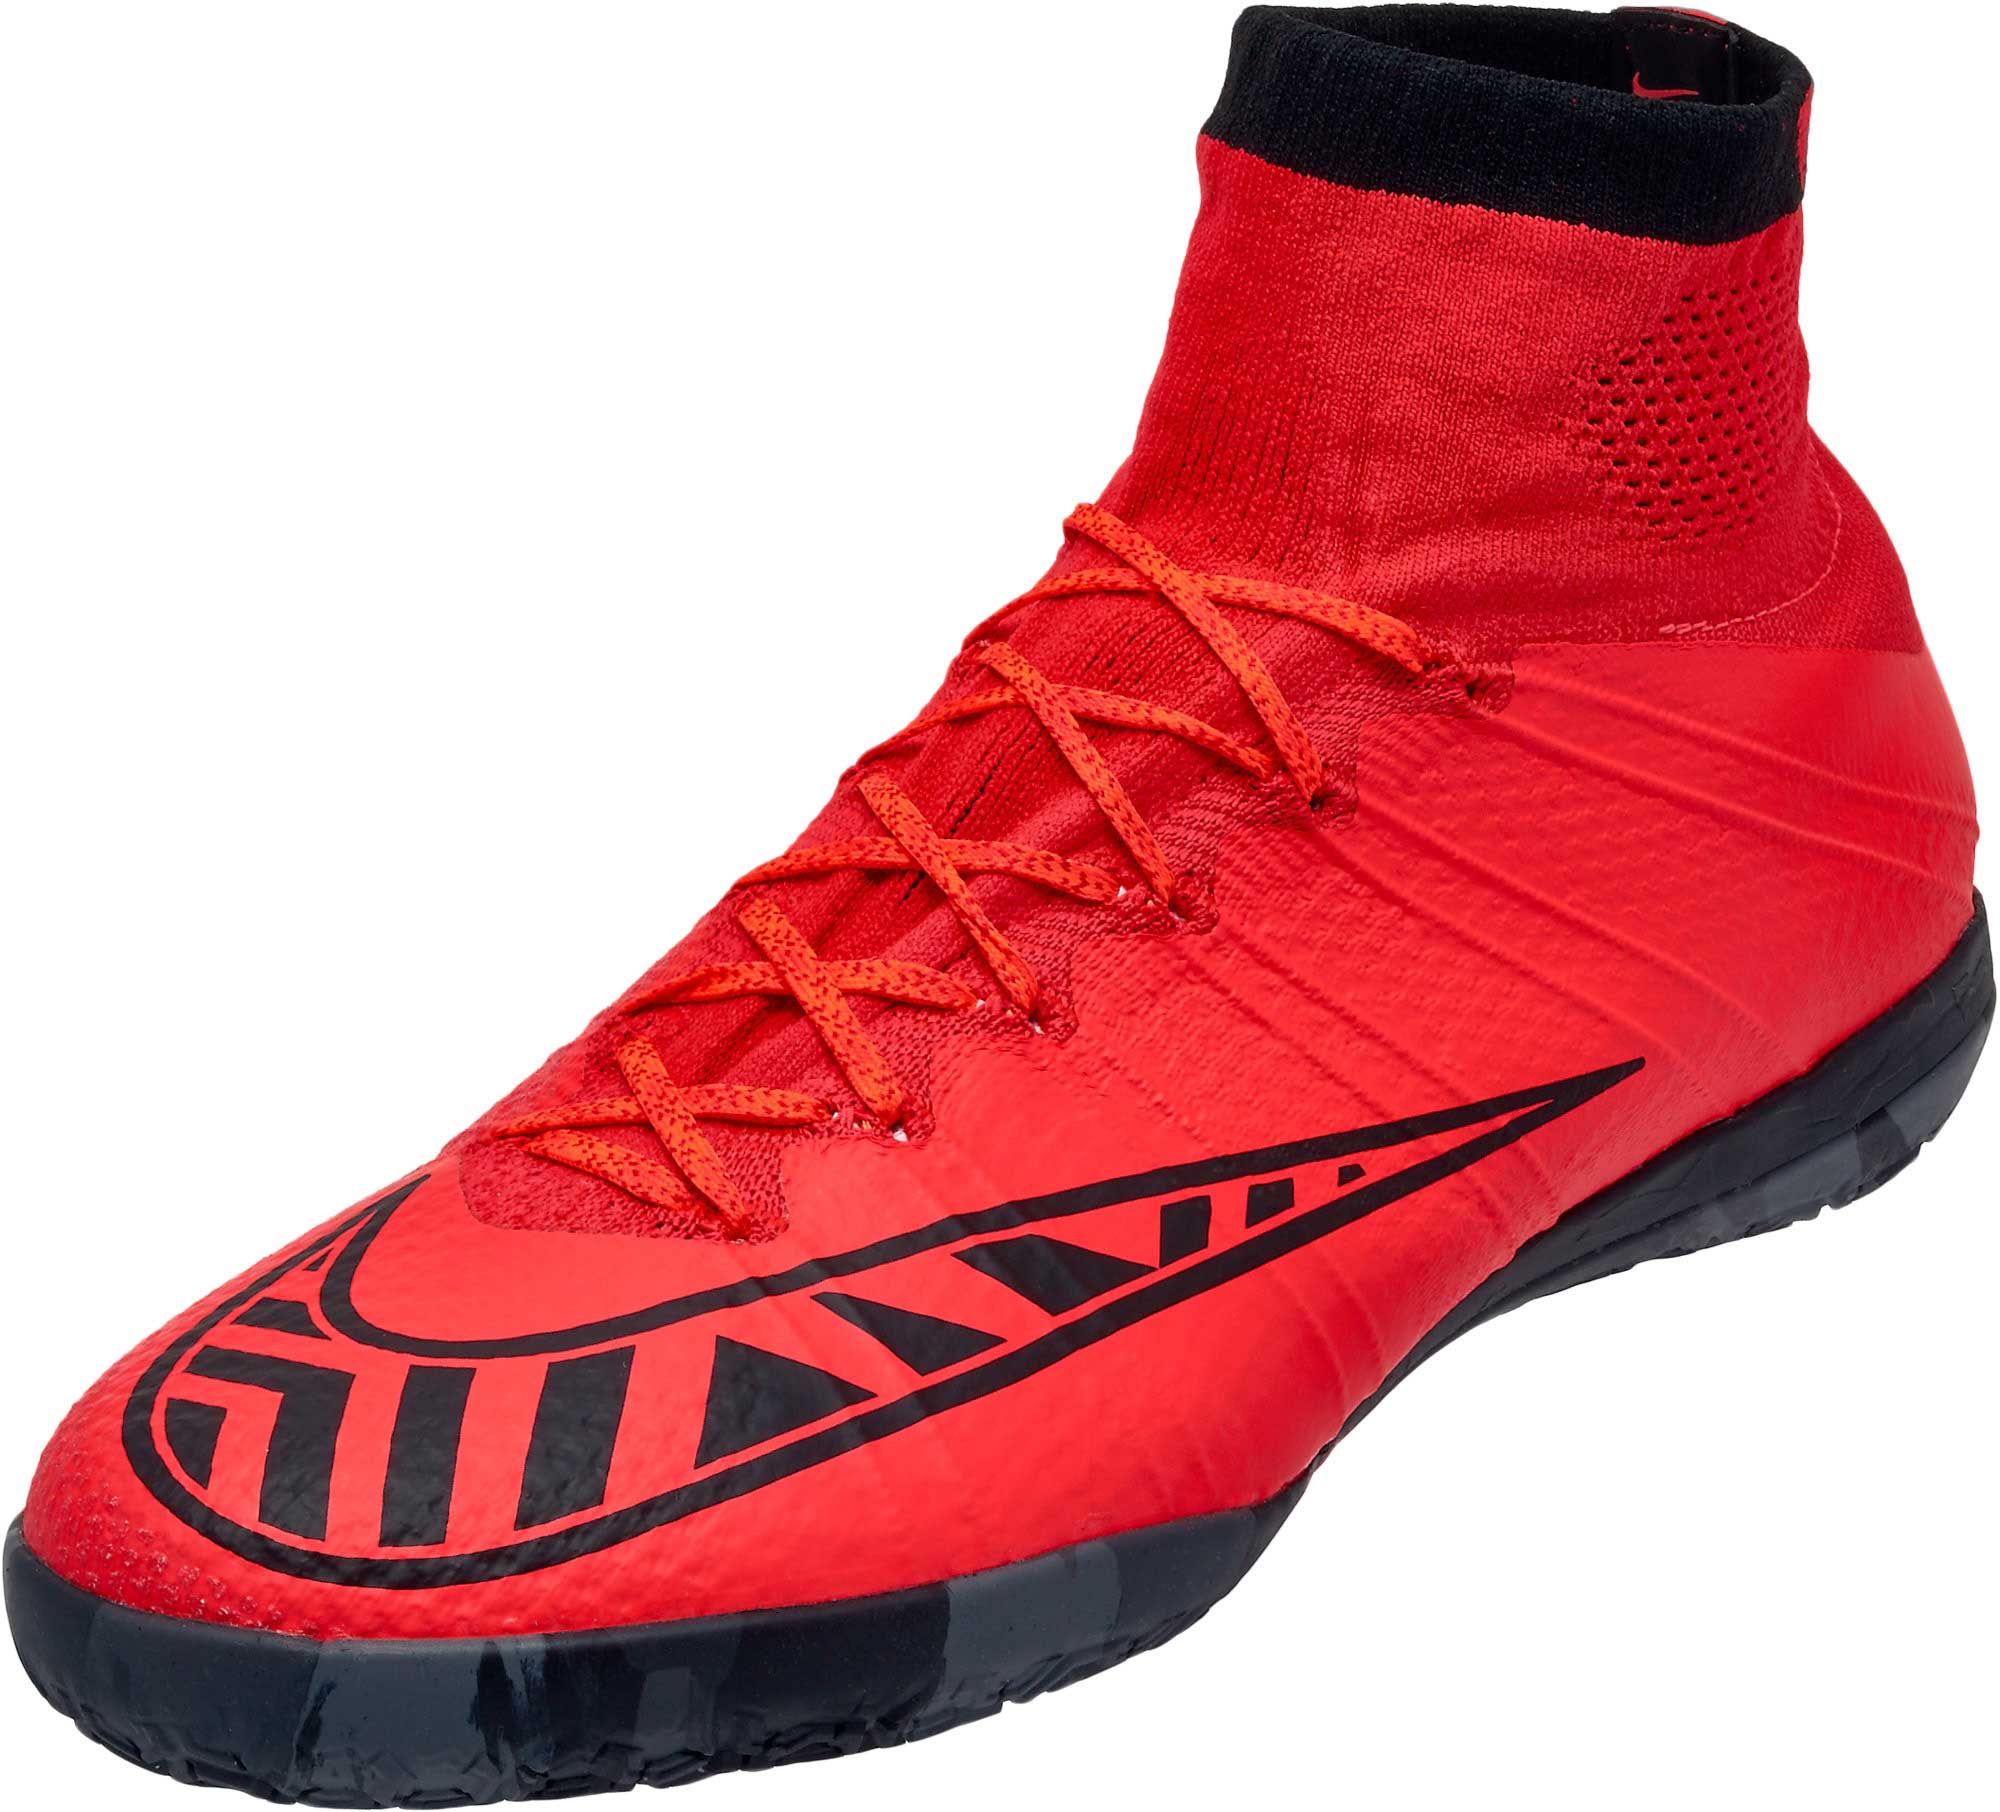 Nike MercurialX Proximo Indoor Shoes - Red Nike Soccer Shoes